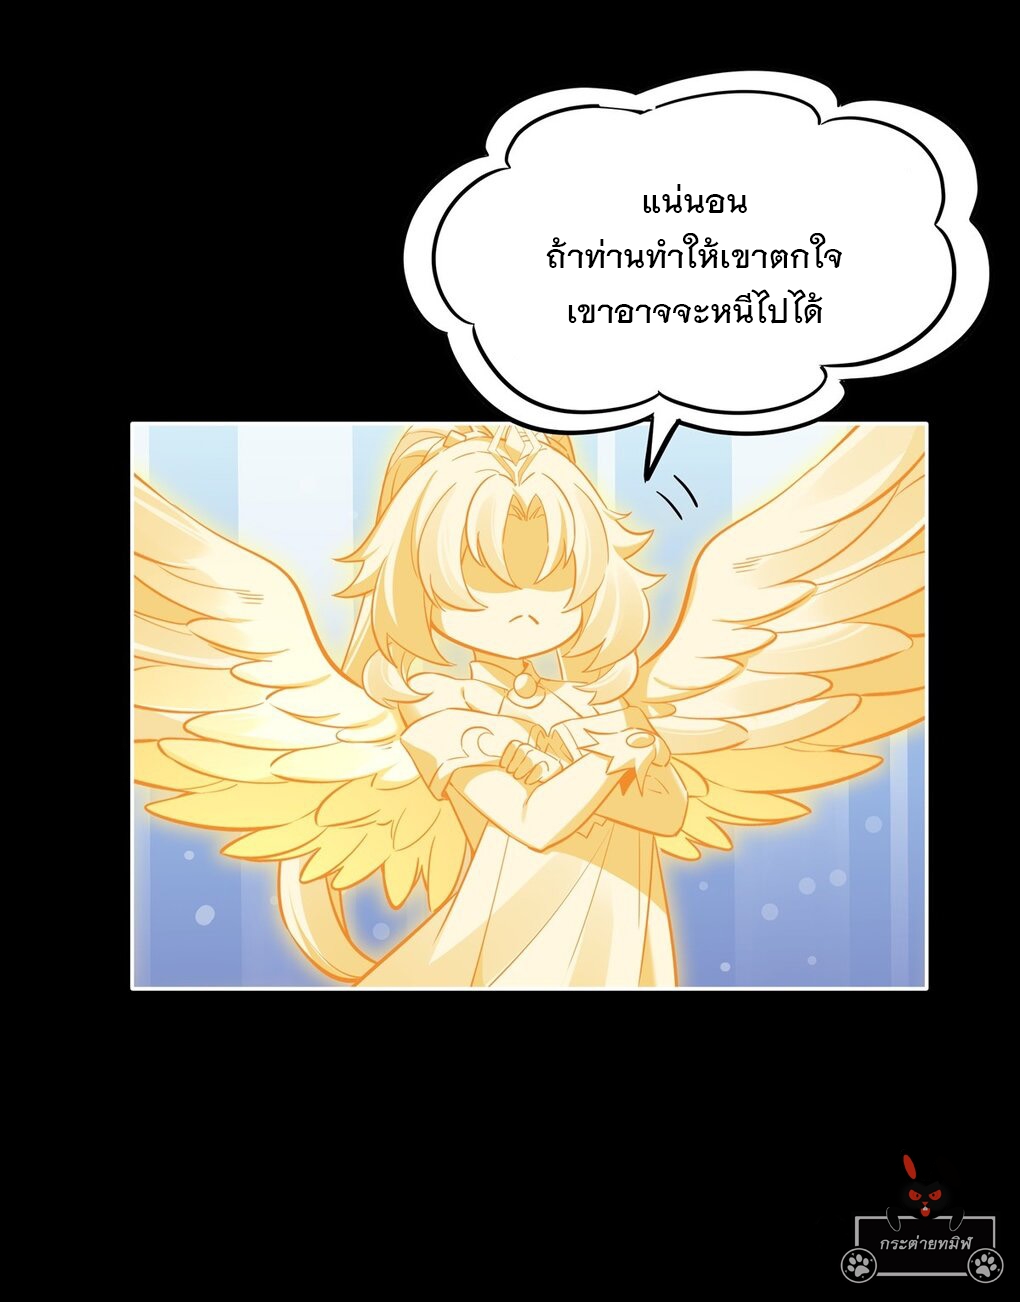 My Female Apprentices Are All Big Shots From the Future Ã Â¸â€¢Ã Â¸Â­Ã Â¸â„¢Ã Â¸â€”Ã Â¸ÂµÃ Â¹Ë† 96 (35)